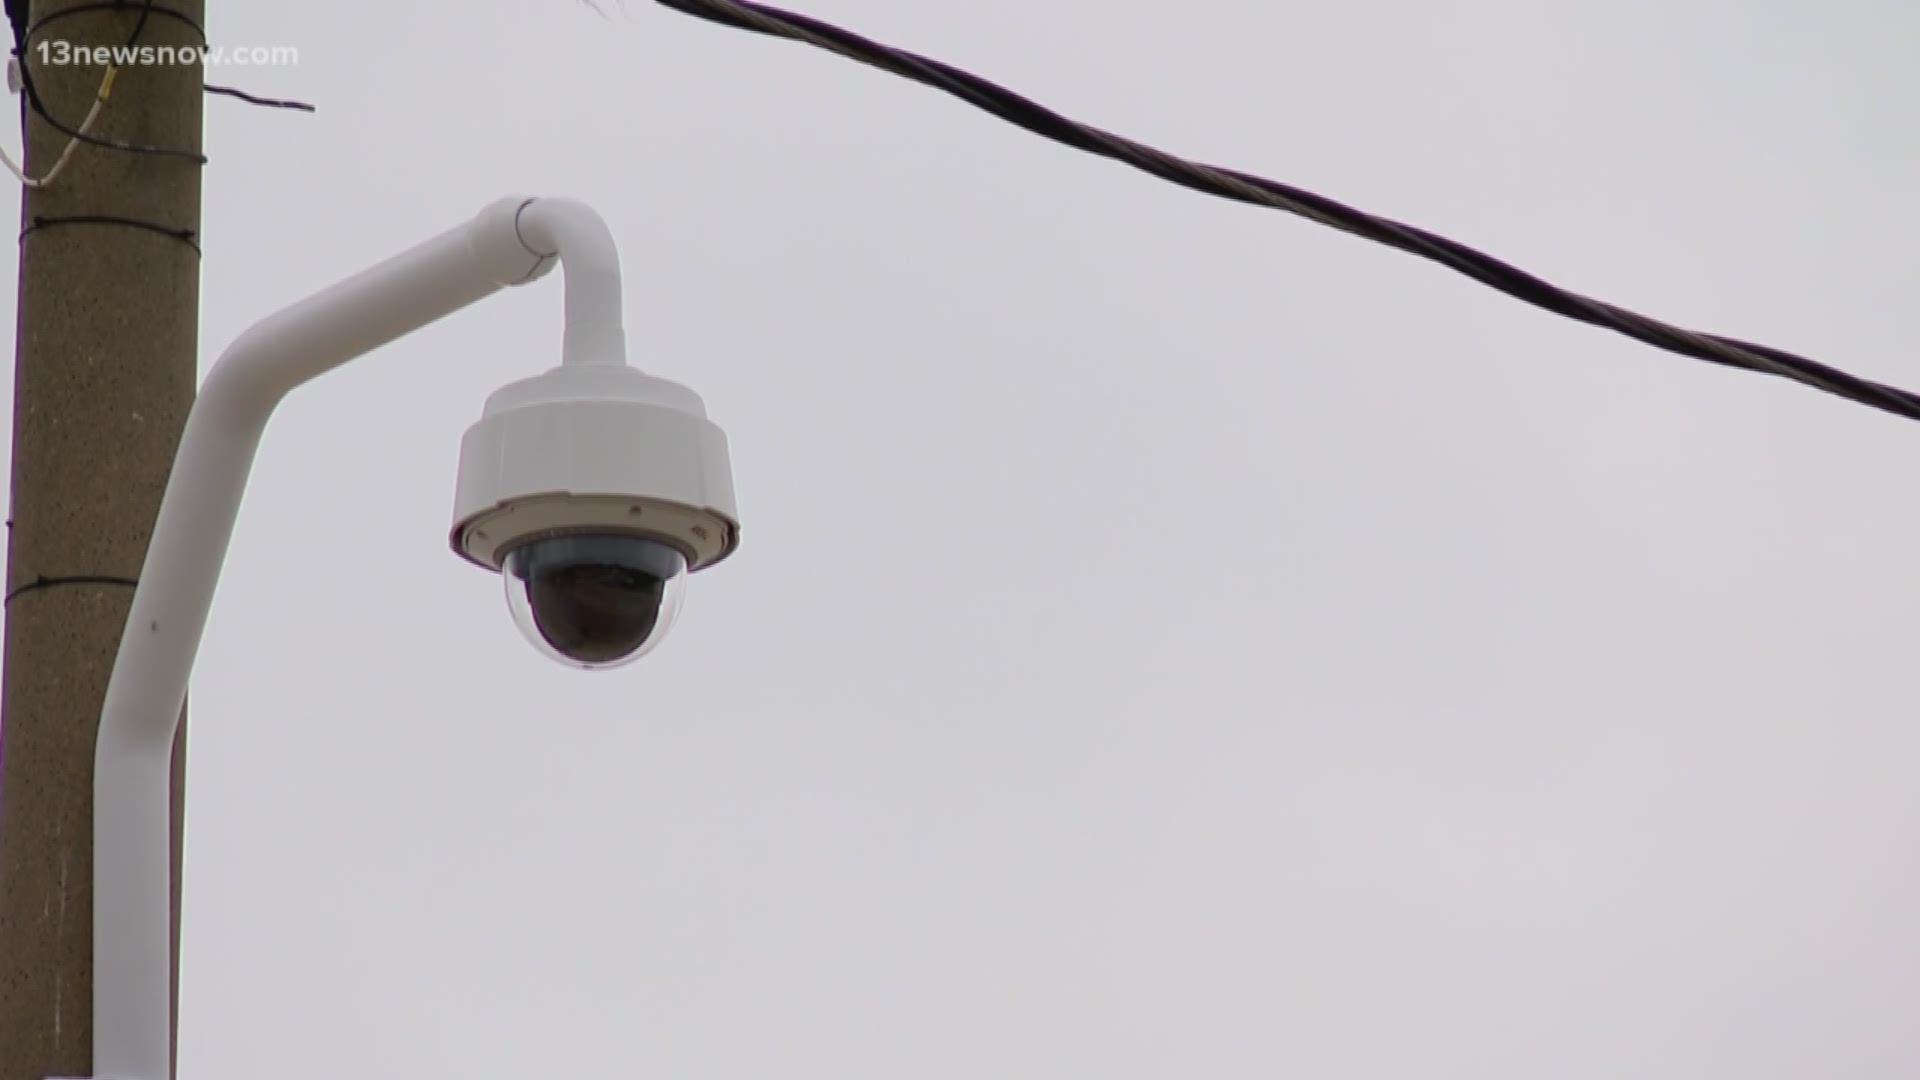 The Hampton Police Division installed security cameras at Buckroe Beach. Neighbors are relieved with the development, but they want more cameras.